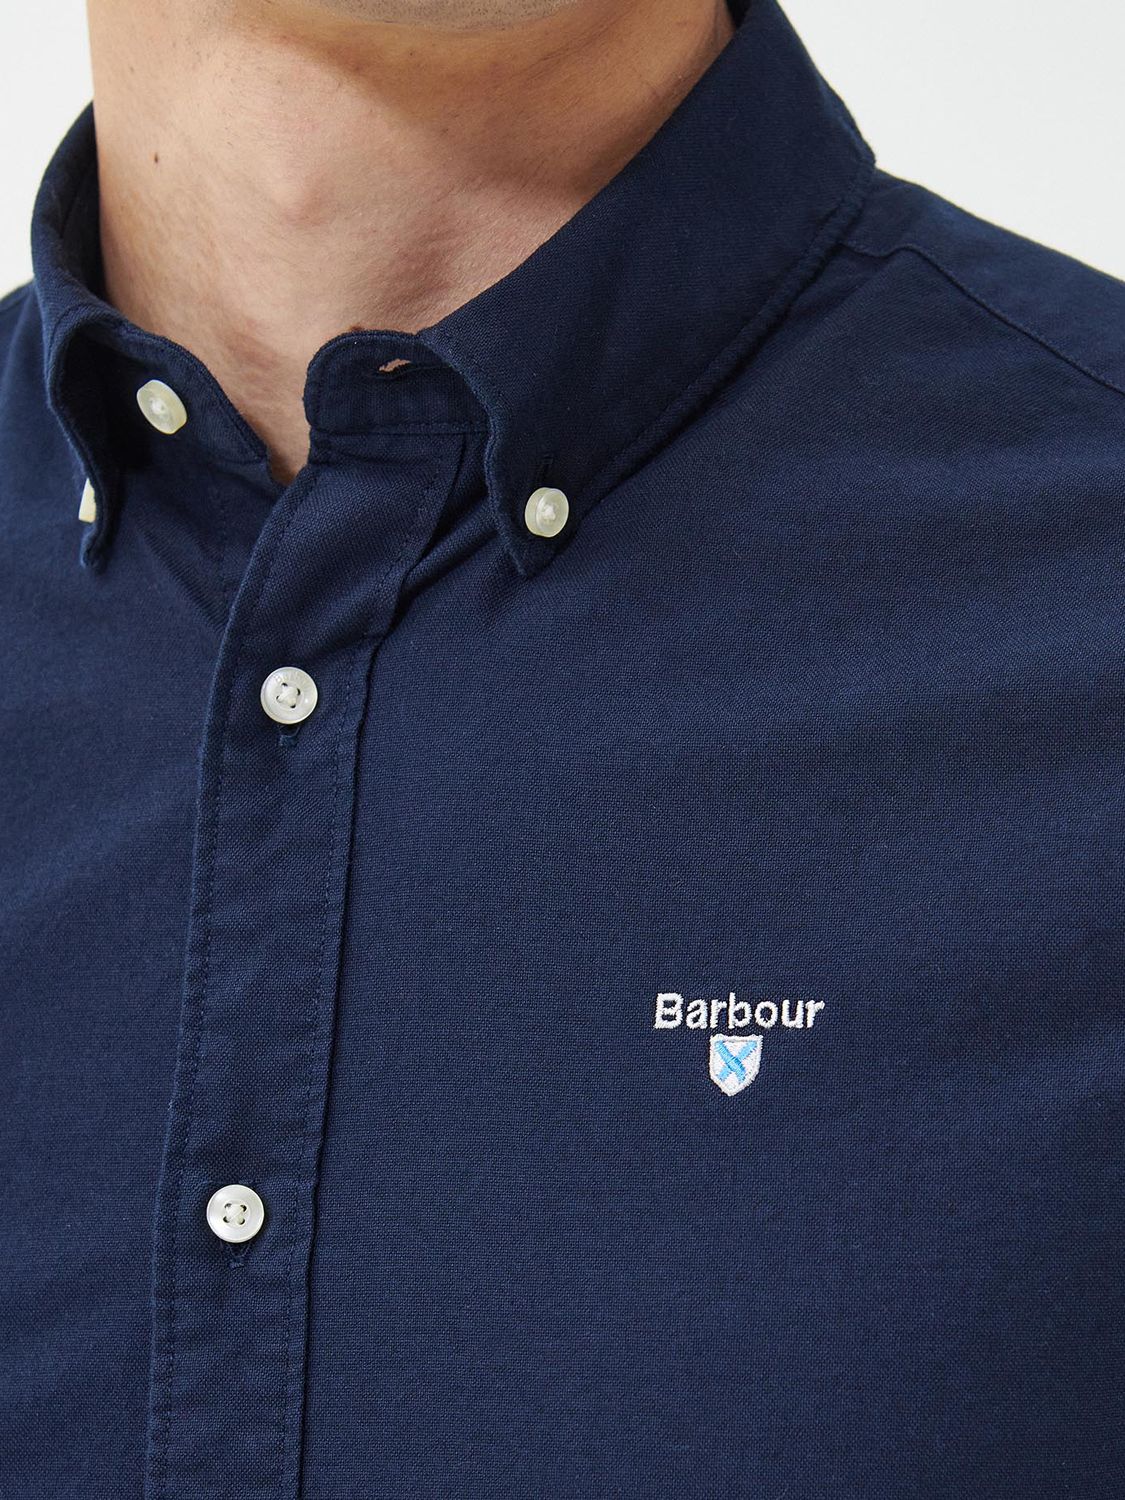 Barbour Tailored Fit Oxford Shirt, Navy, M